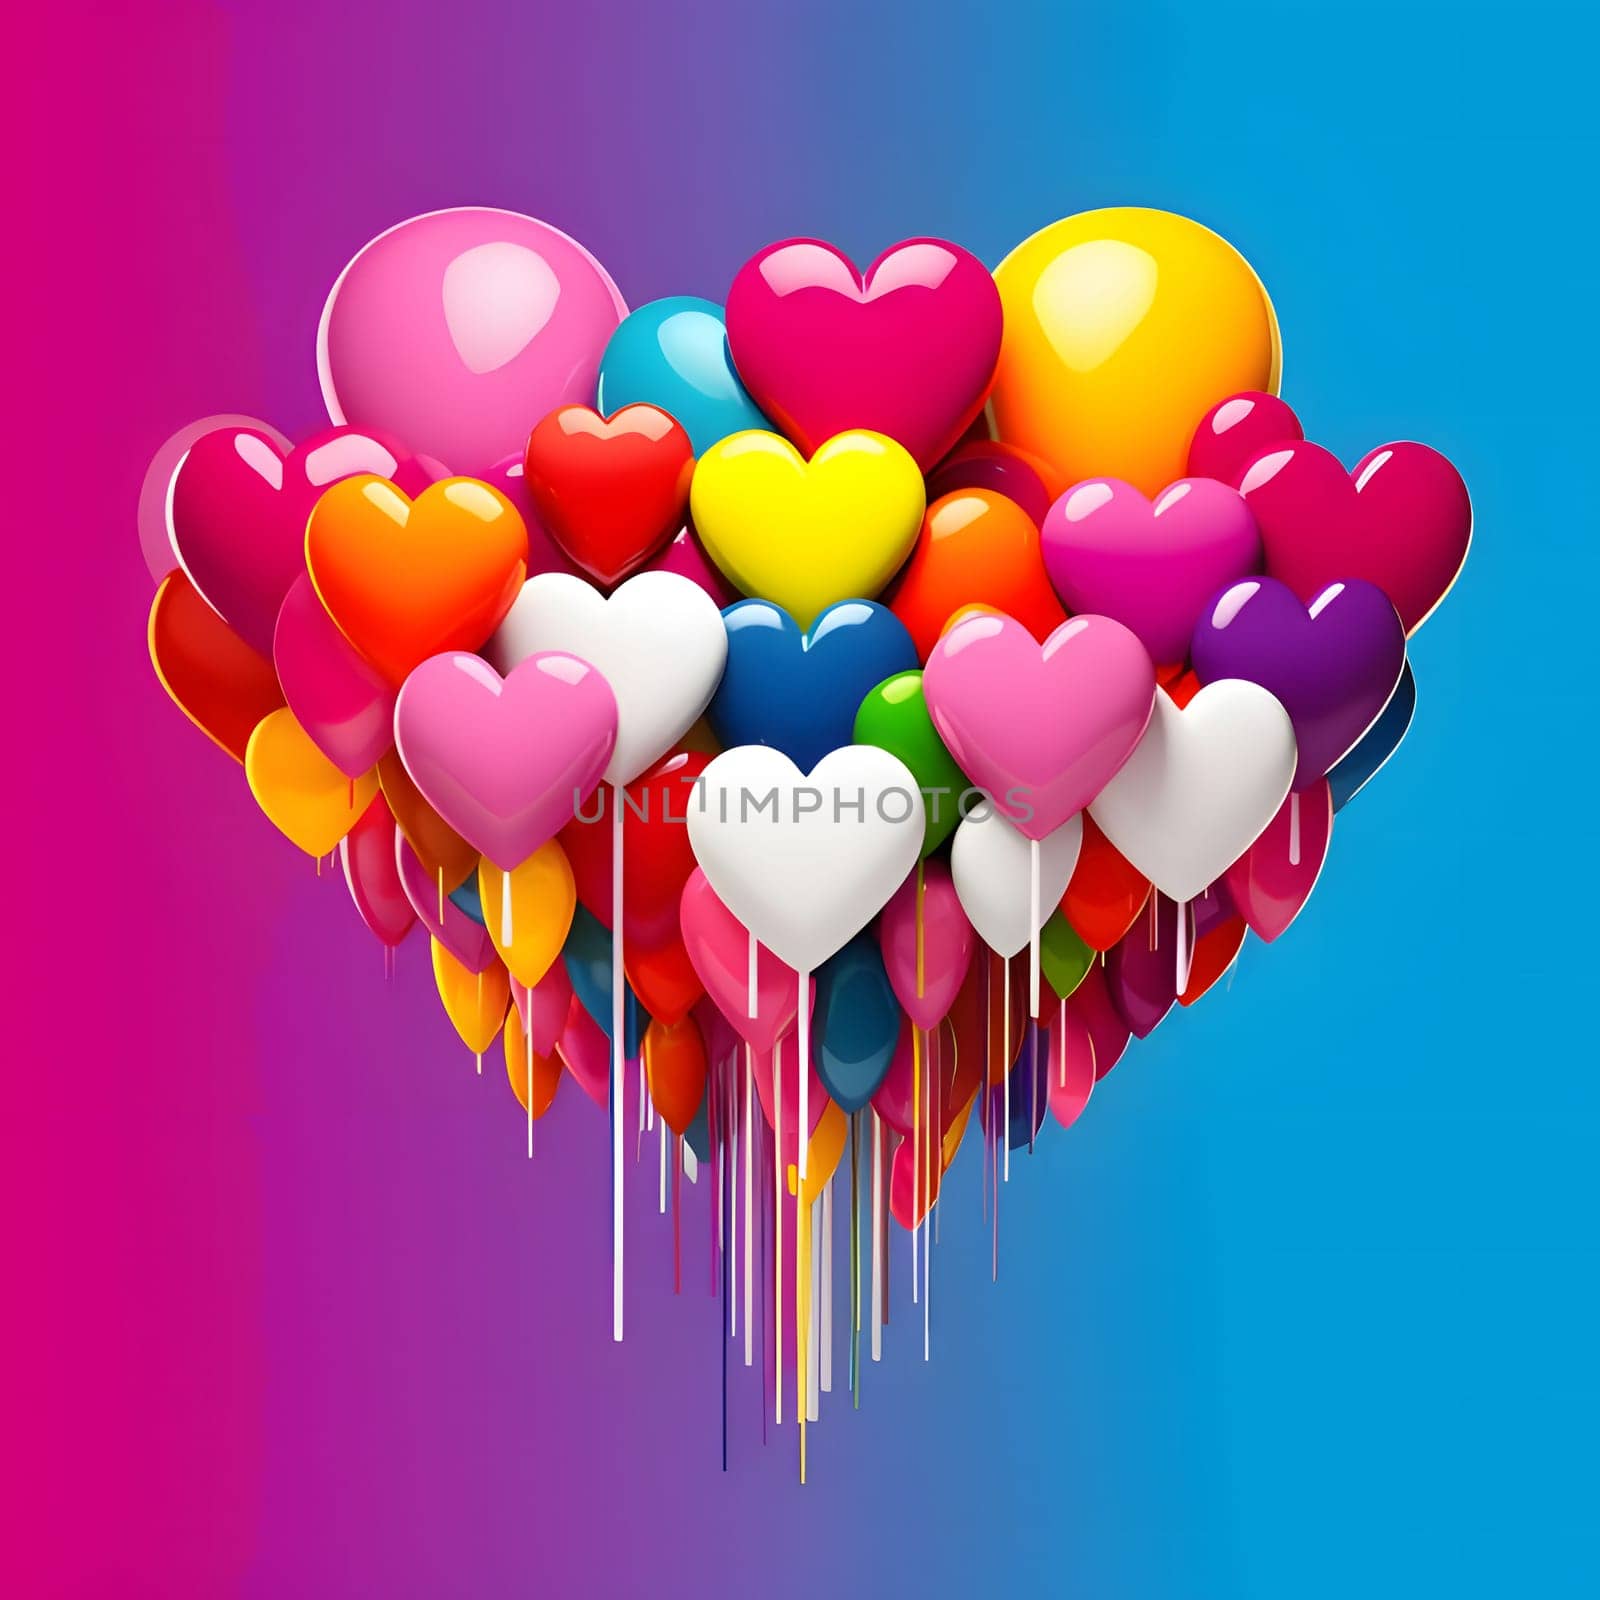 Rainbow colored heart-shaped balloons abstract composition. Heart as a symbol of affection and love. by ThemesS